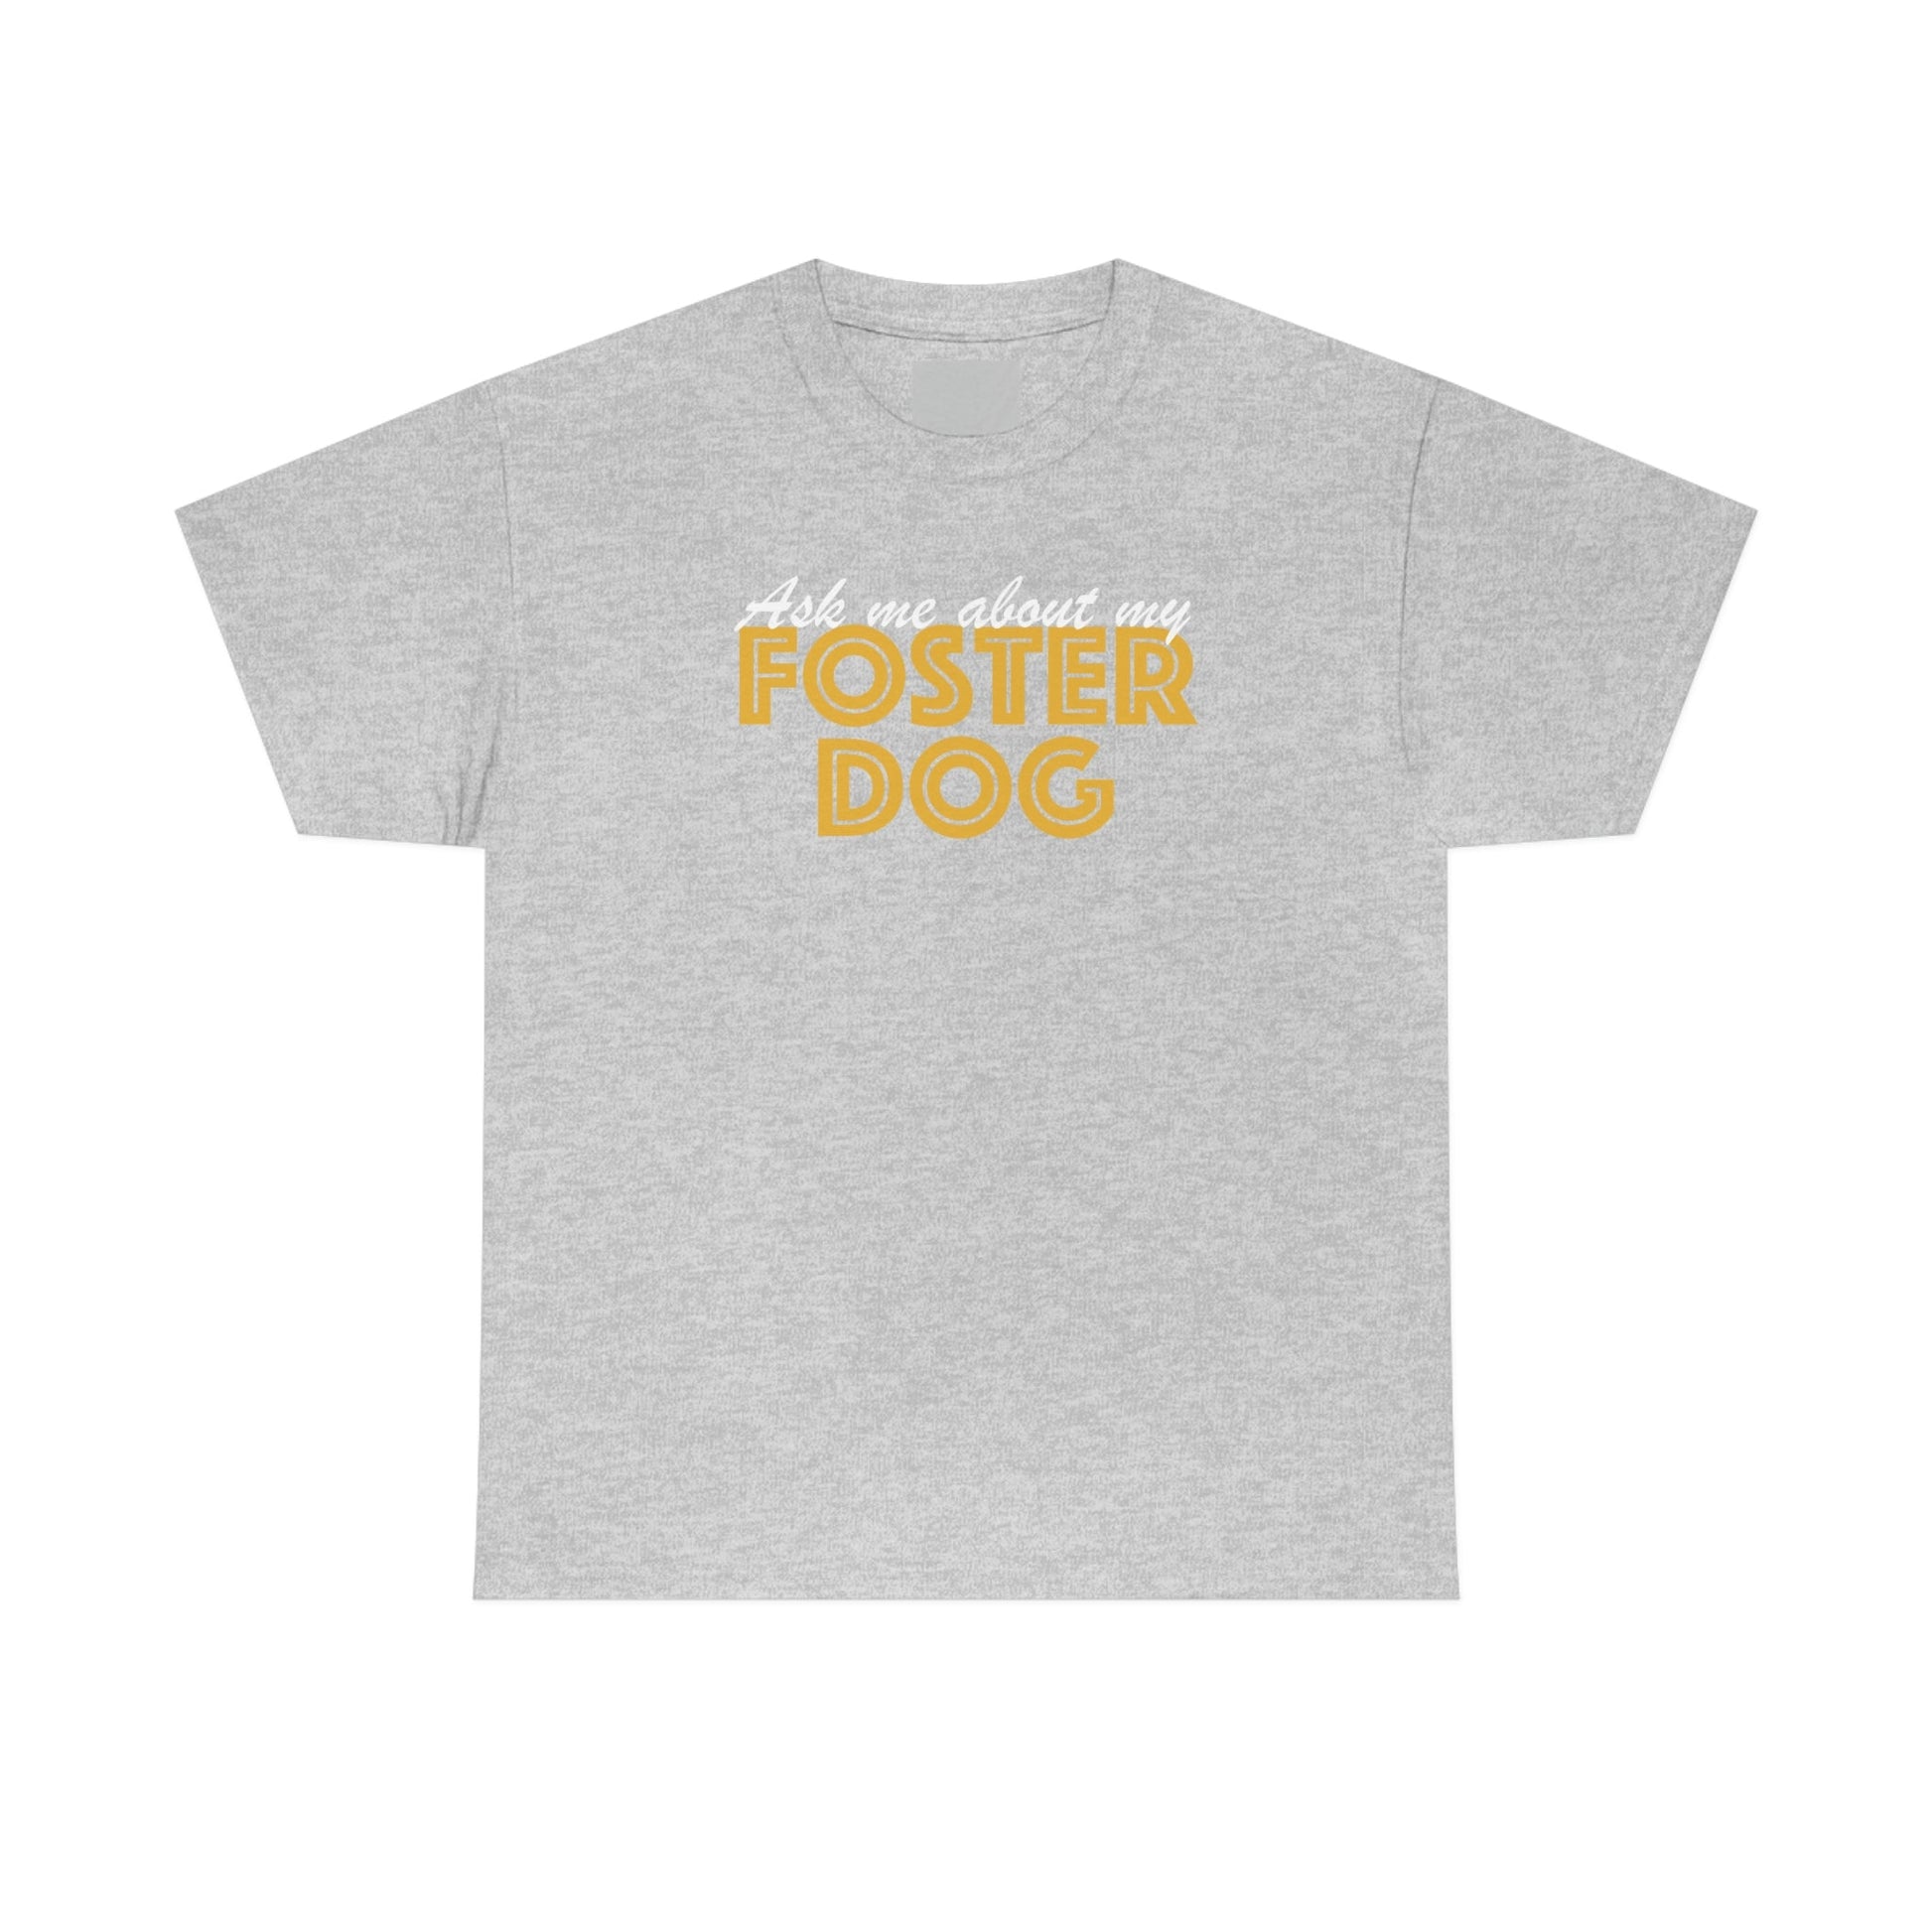 Ask Me About My Foster Dog | Text Tees - Detezi Designs-28299776779378949802